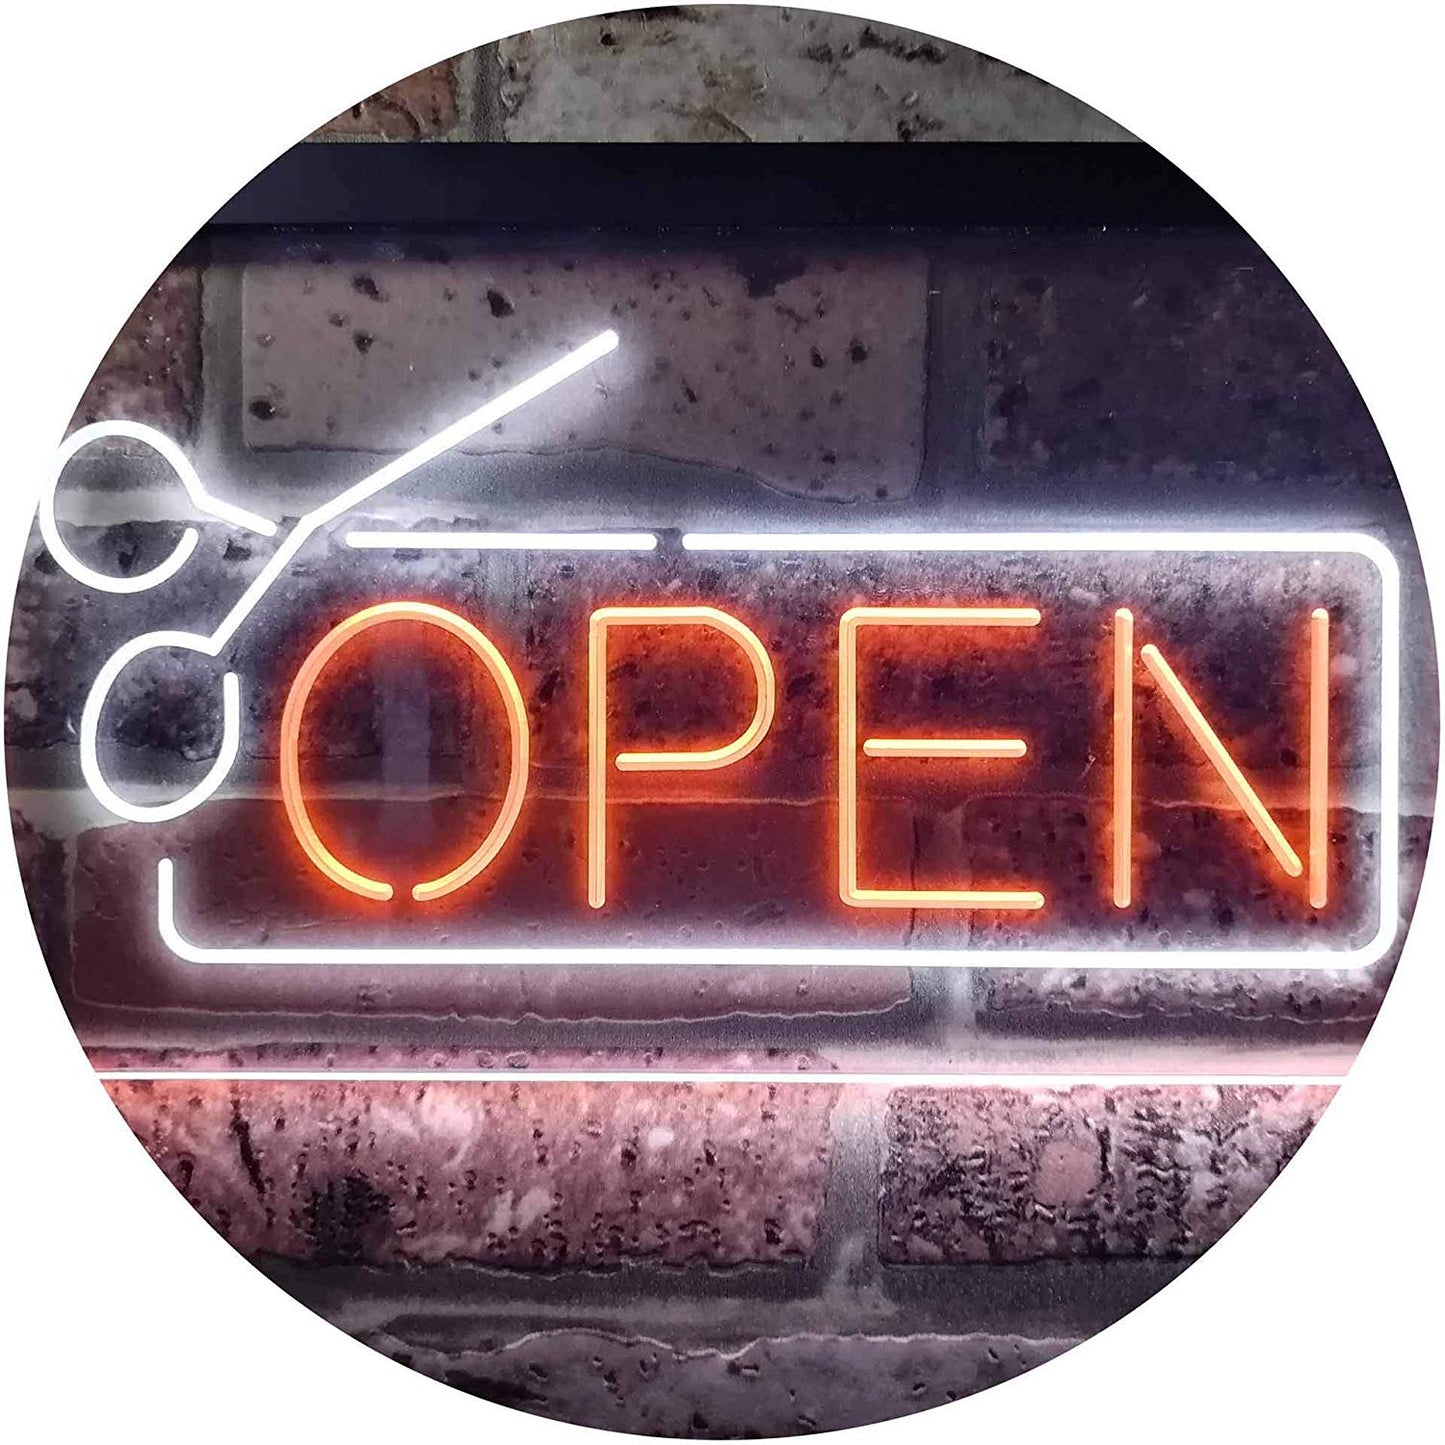 Scissors Open Barber Salon Hair Cuts LED Neon Light Sign - Way Up Gifts